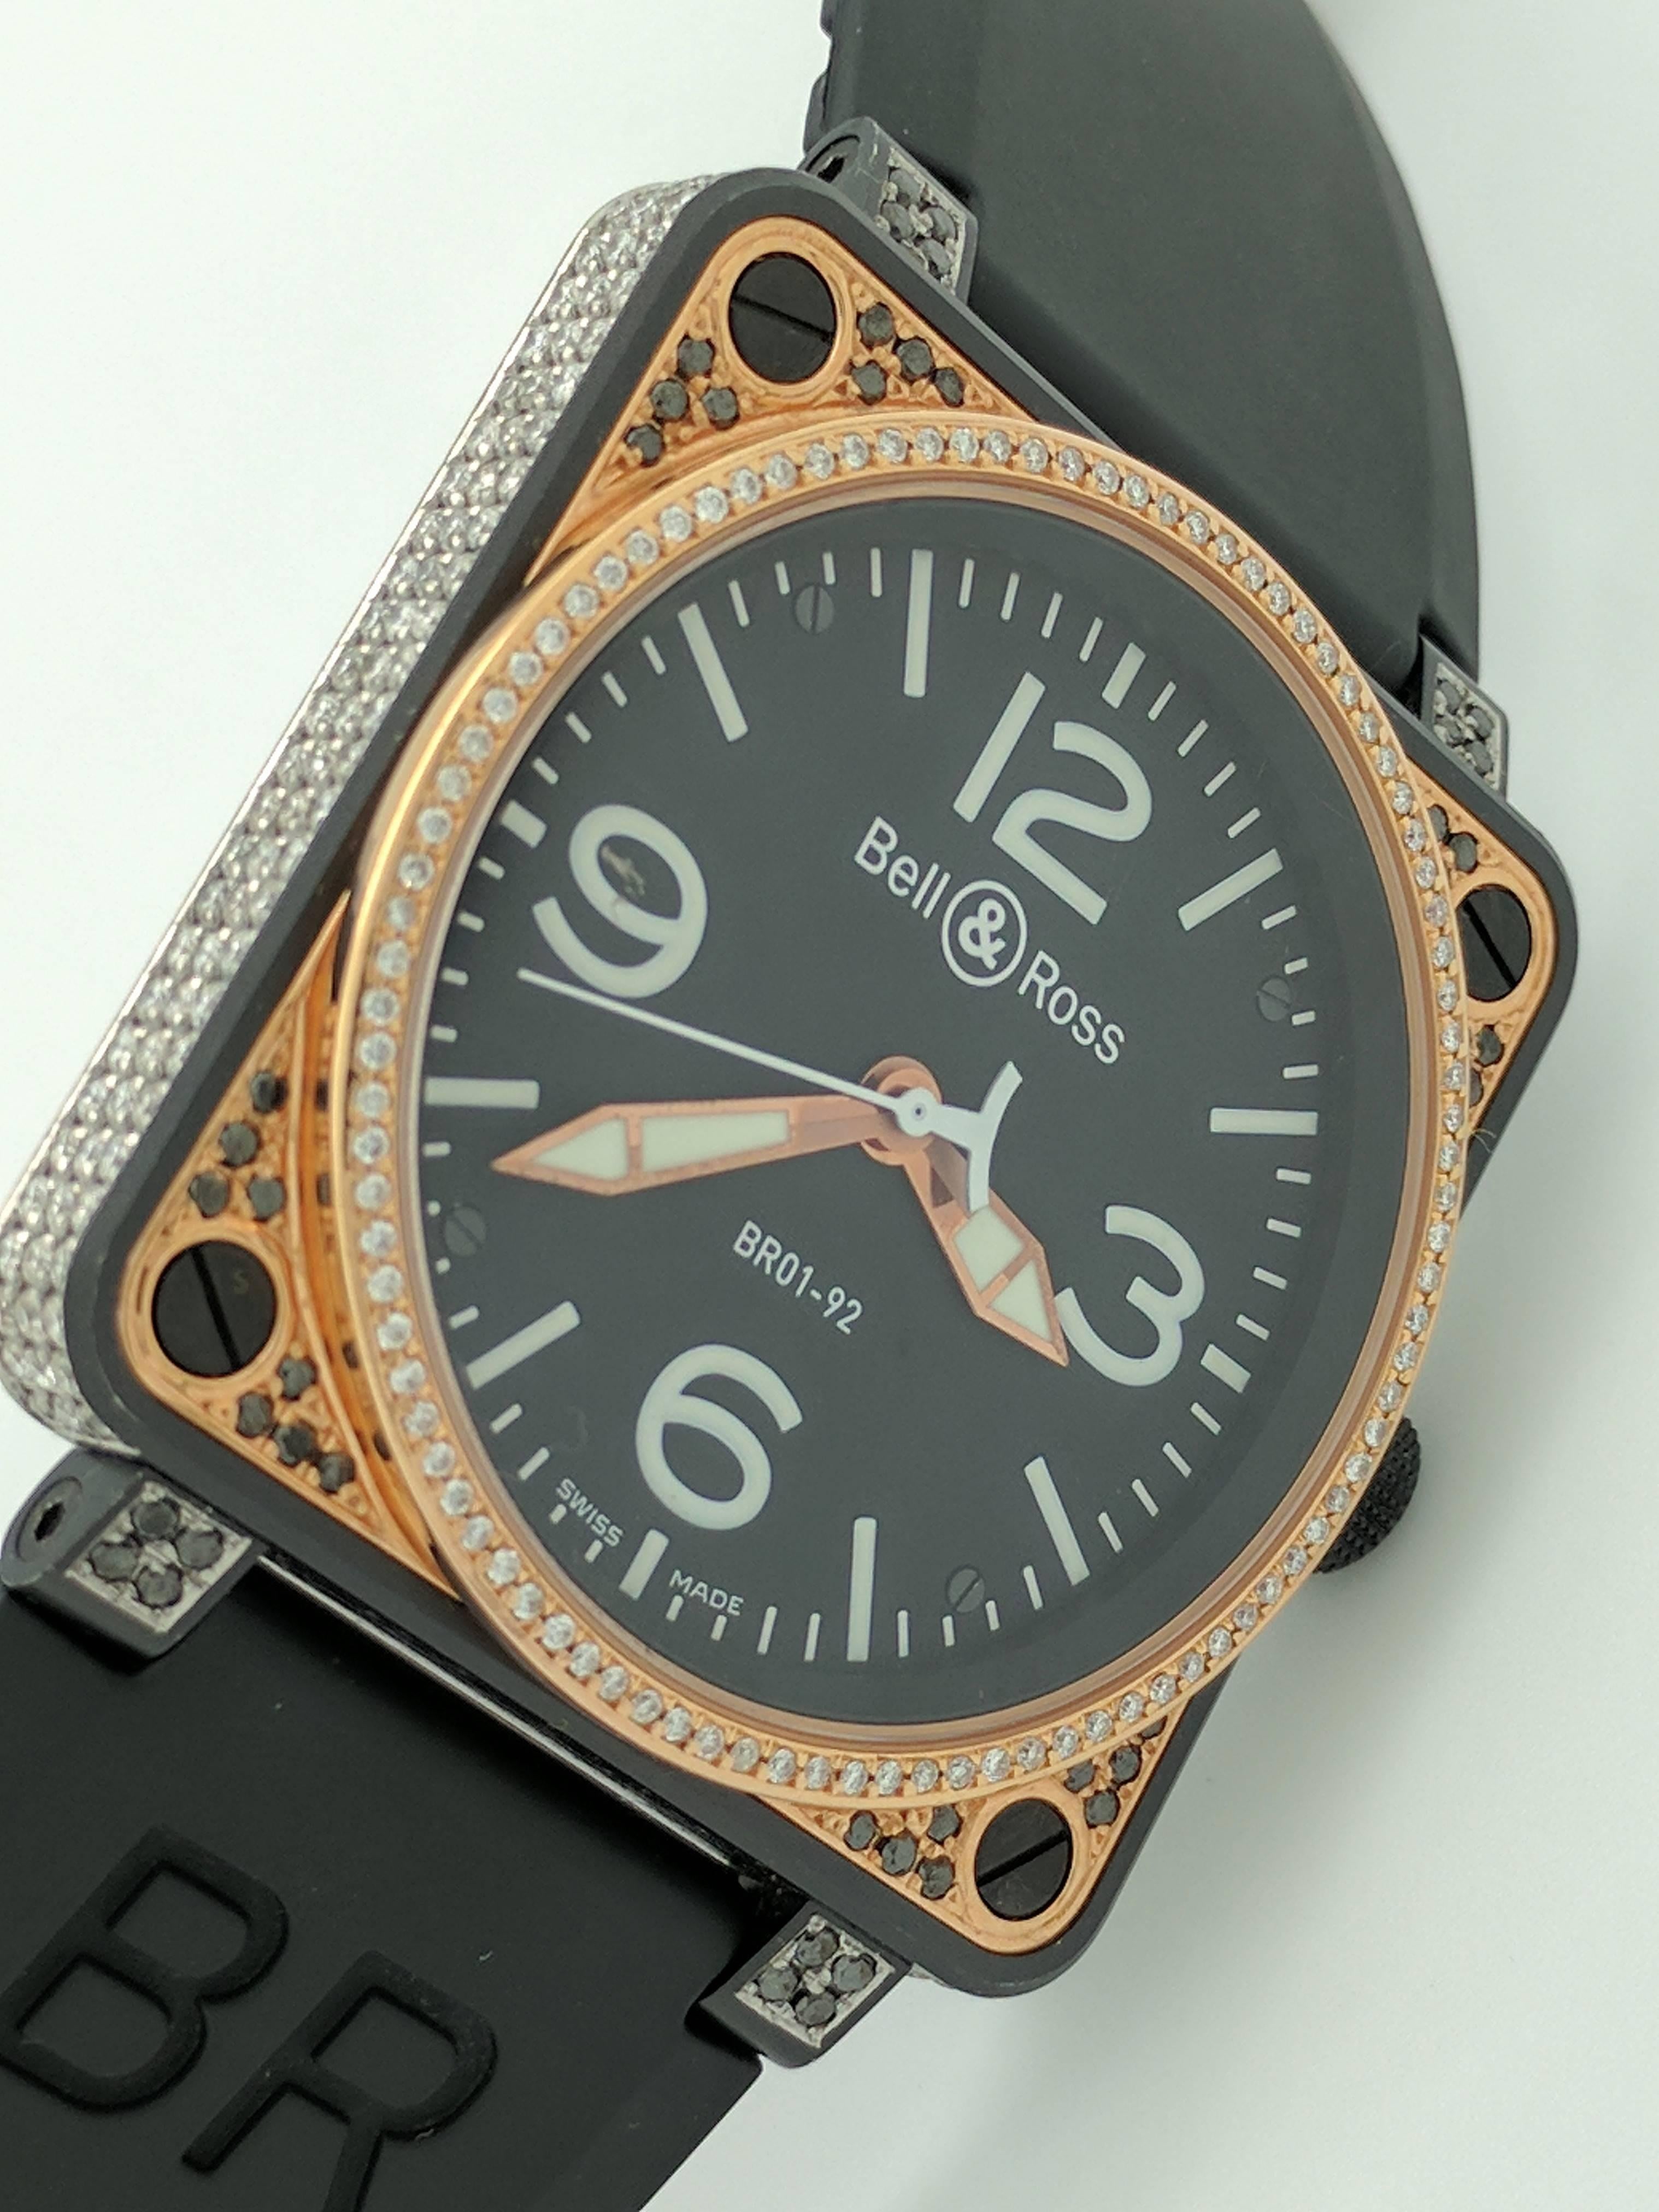 You are viewing an Authentic Men's Bell & Ross Aviation watch.

This watch is model number BR01-92.

Watch is made of 18k rose gold and black PVD coated stainless steel. Watch features an automatic movement, black dial with luminous markers and